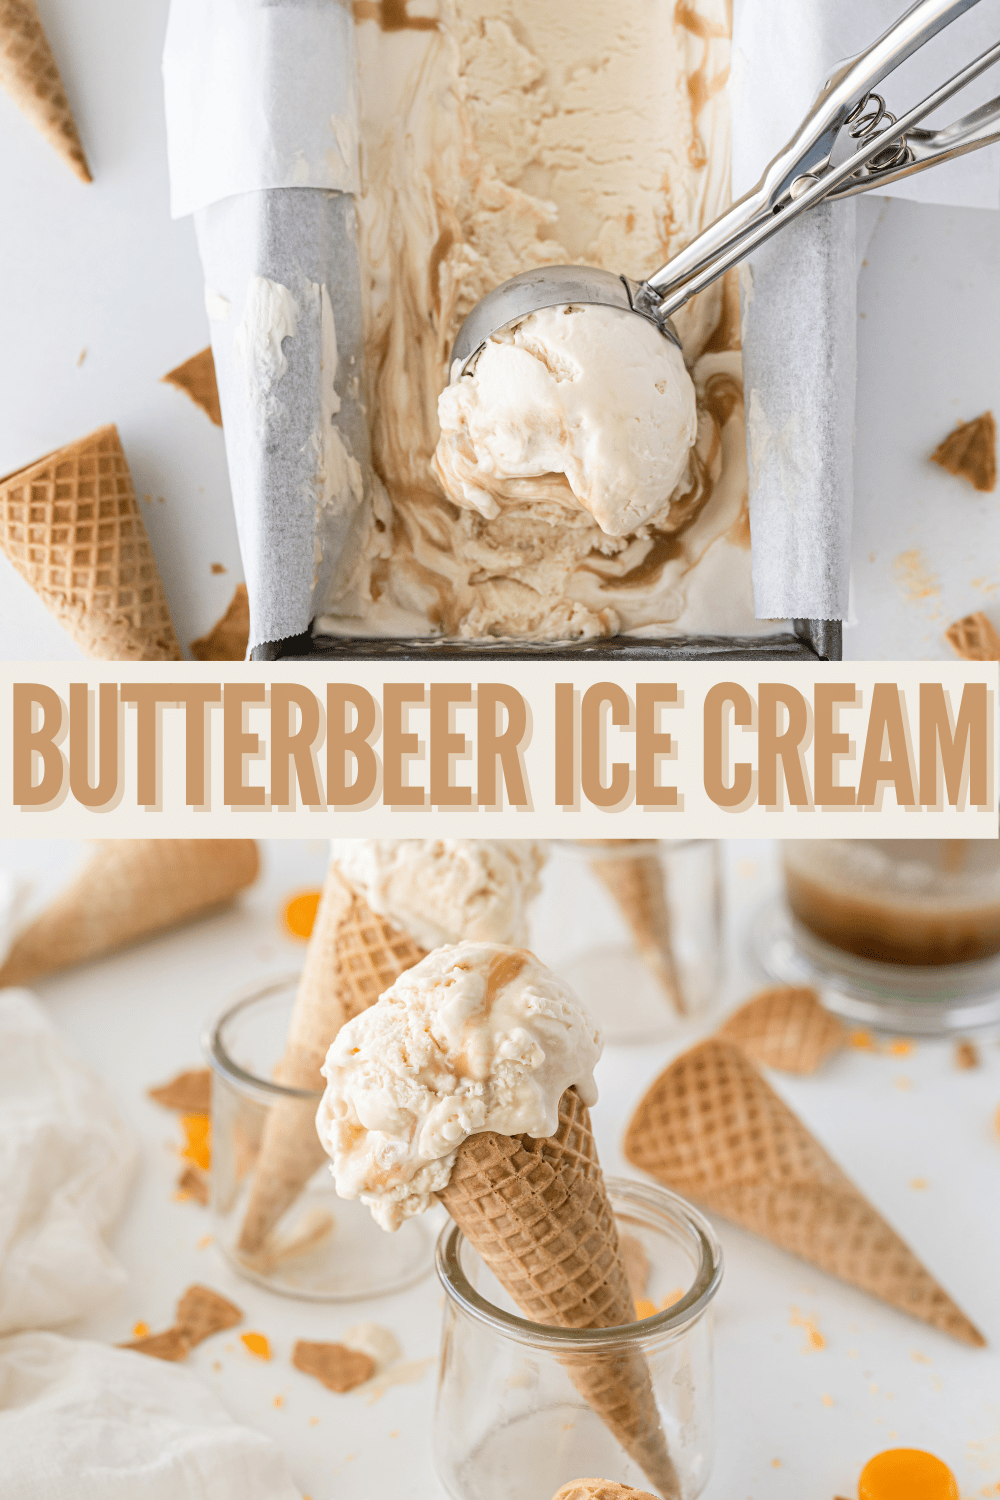 This Butterbeer Ice Cream is a rich and creamy, no churn ice cream, infused with the flavors of butterscotch and caramel. #butterbeericecream #butterbeer #icecream #harrypotter via @wondermomwannab